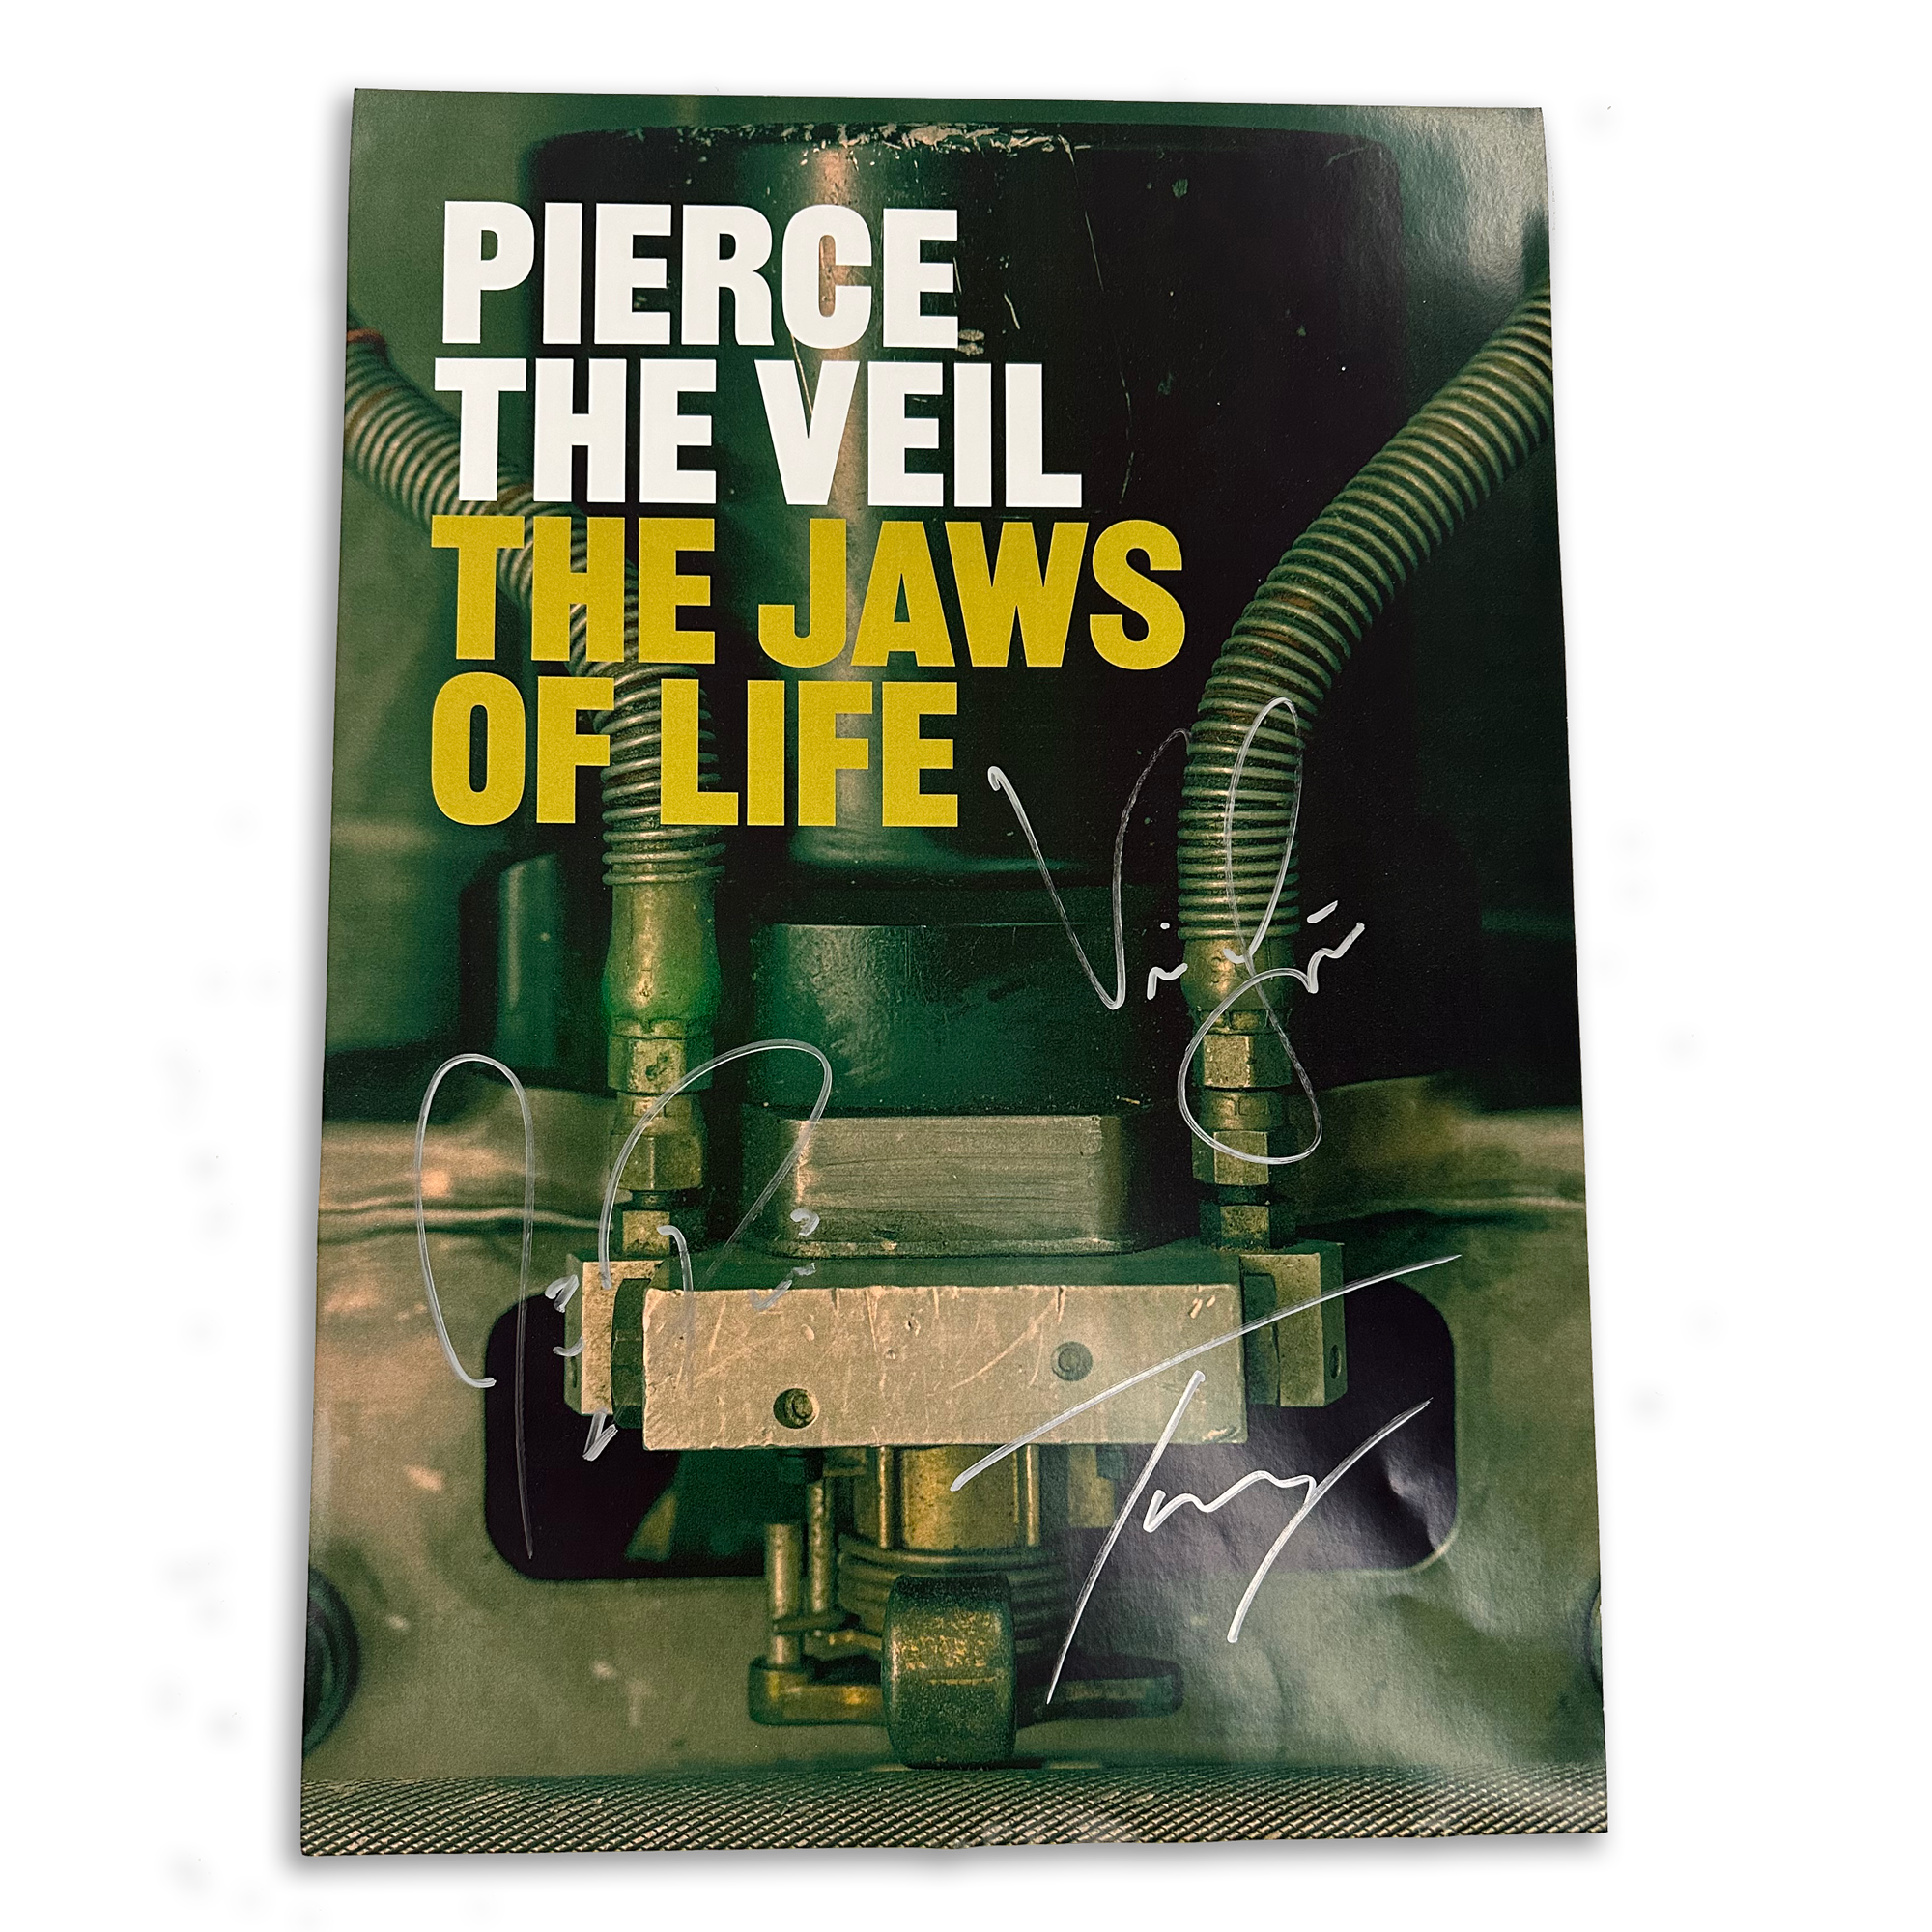 The Jaws Of Life: Limited 'Natural' Vinyl LP + Signed A3 Poster